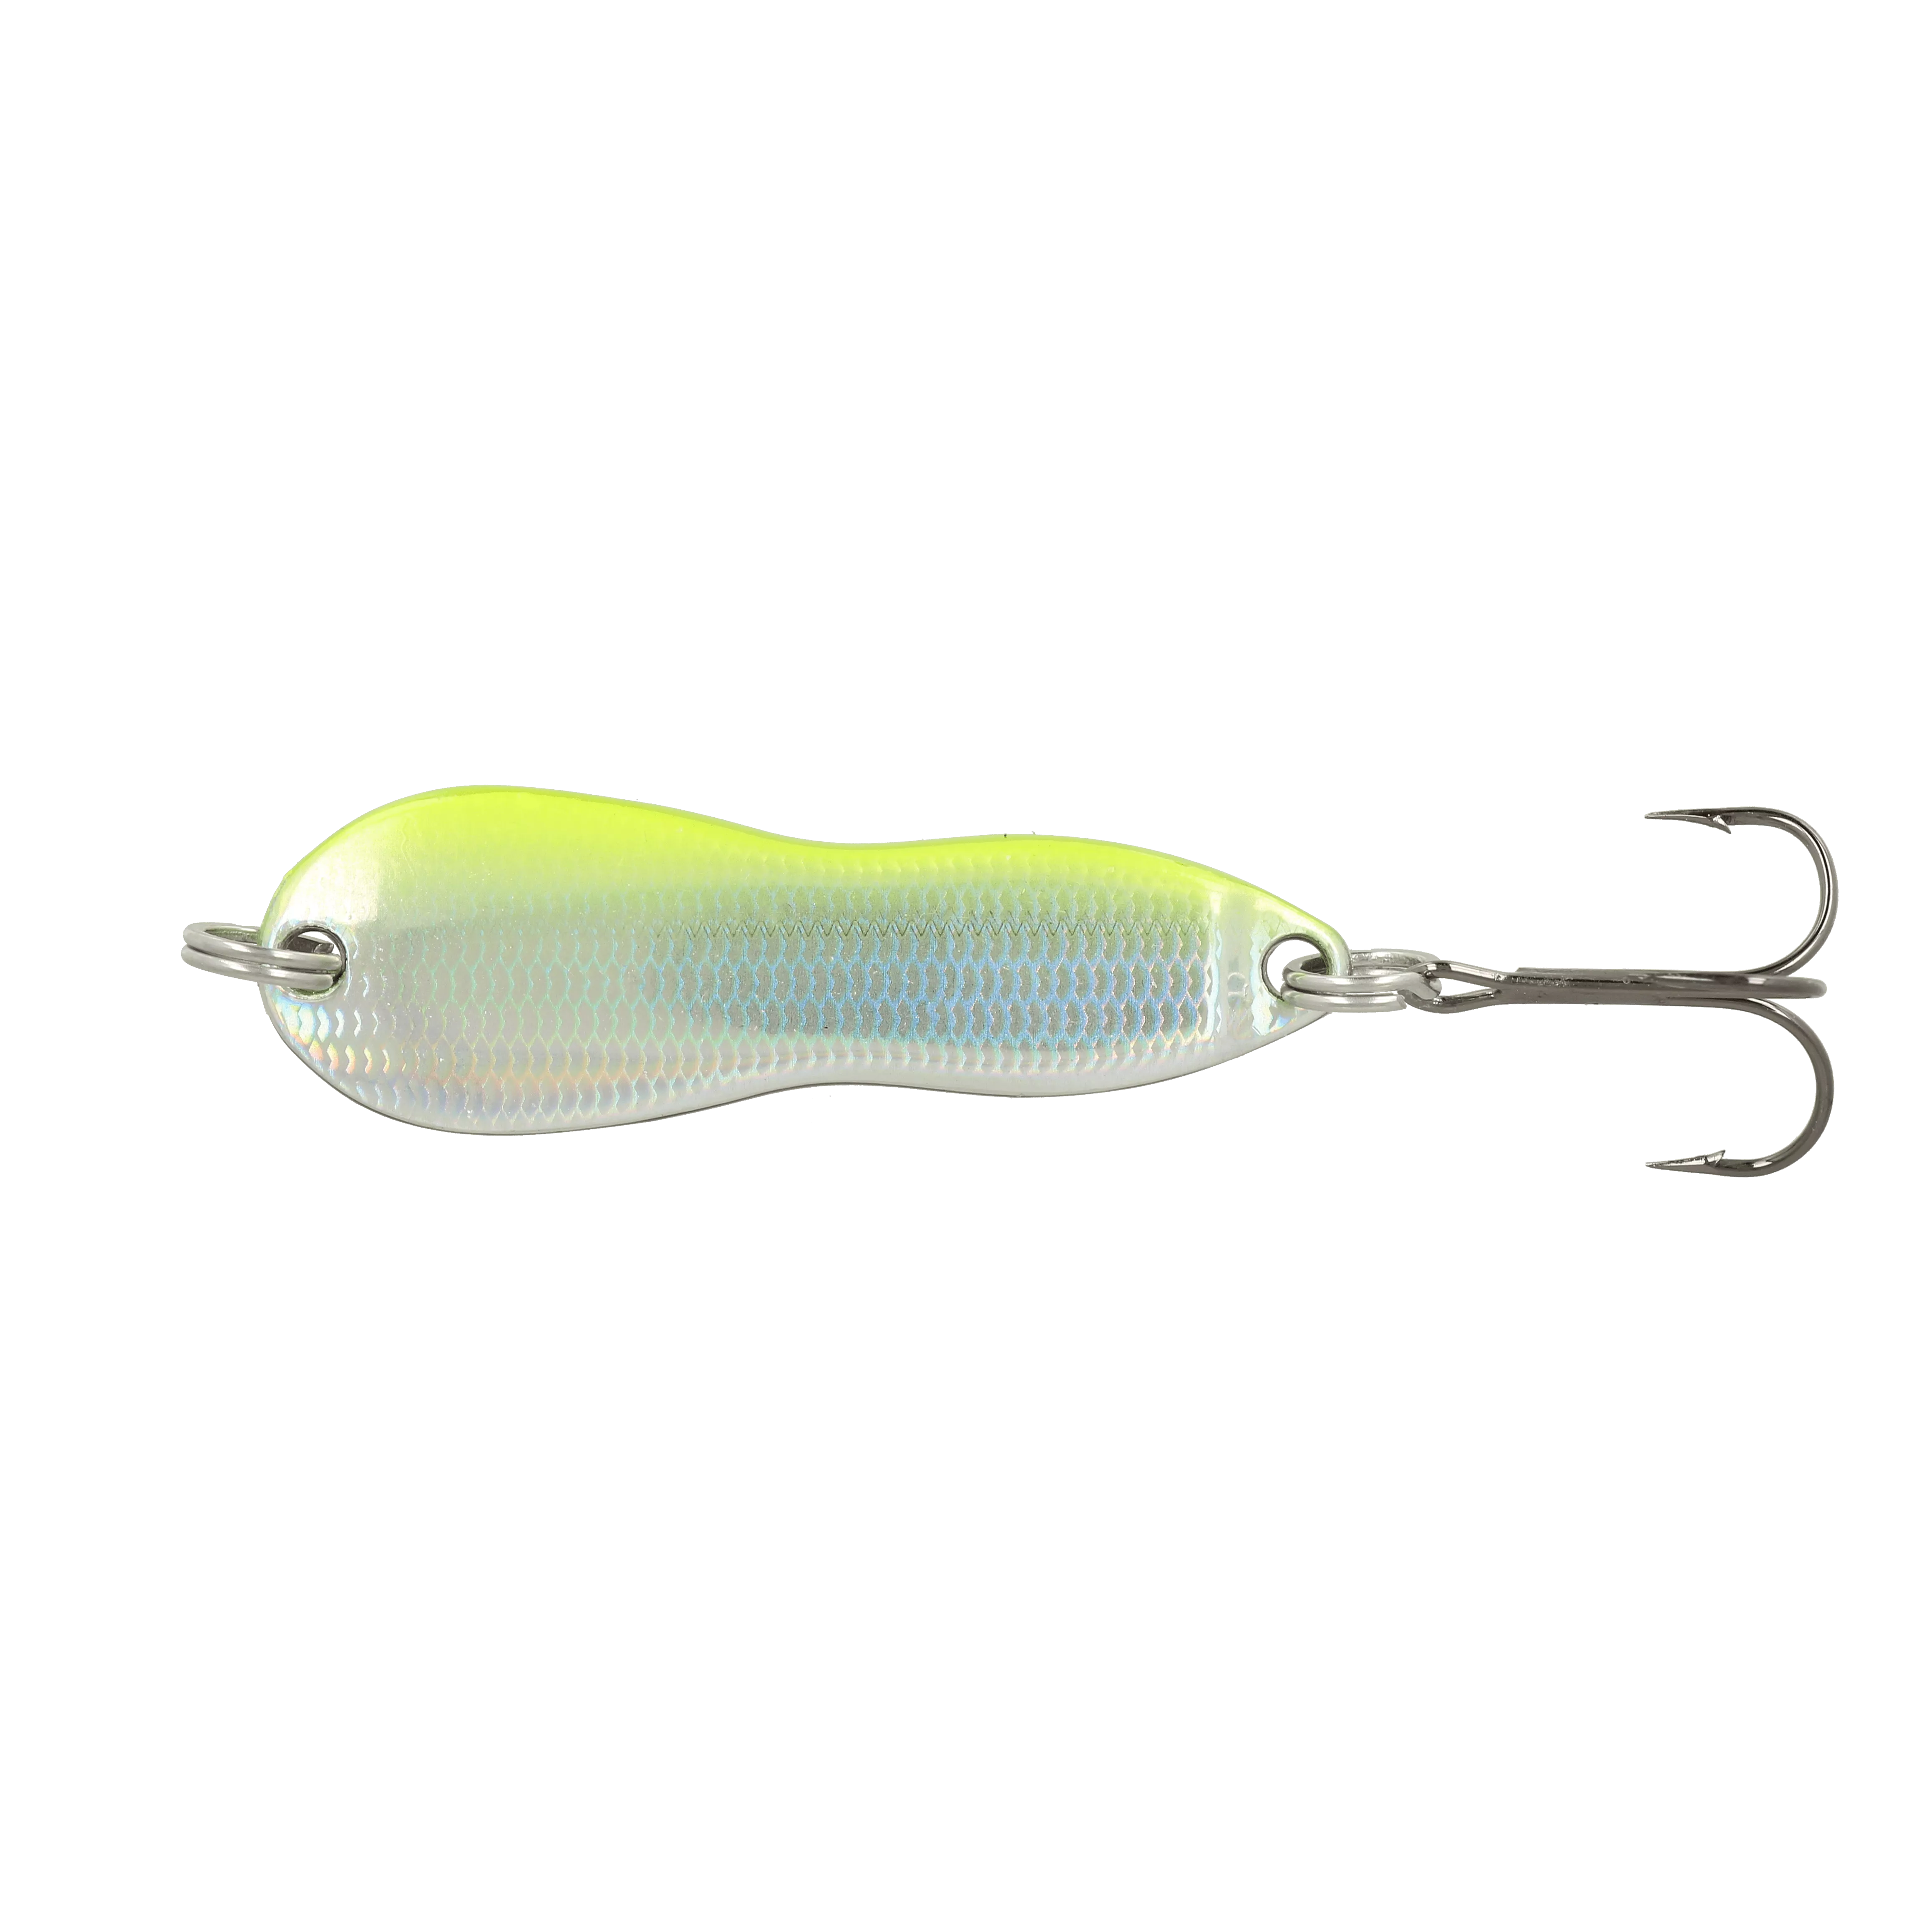 Golden Catch Spoon Niboshi 12.5g: check it out on the official Golden Catch  website!